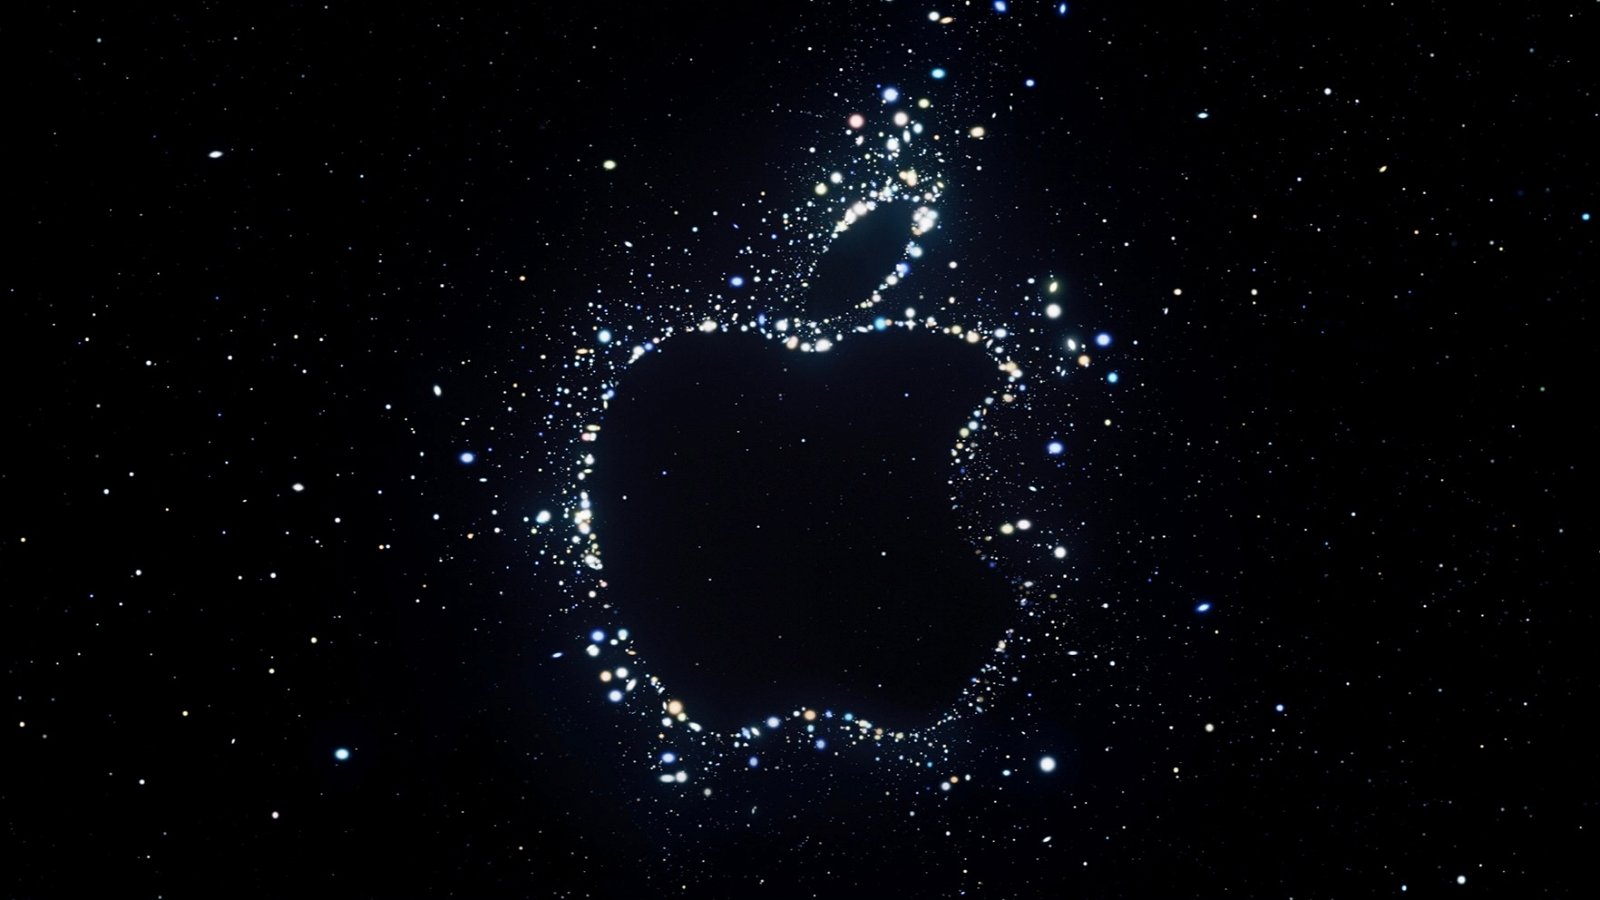 Apple Event: “Far out”